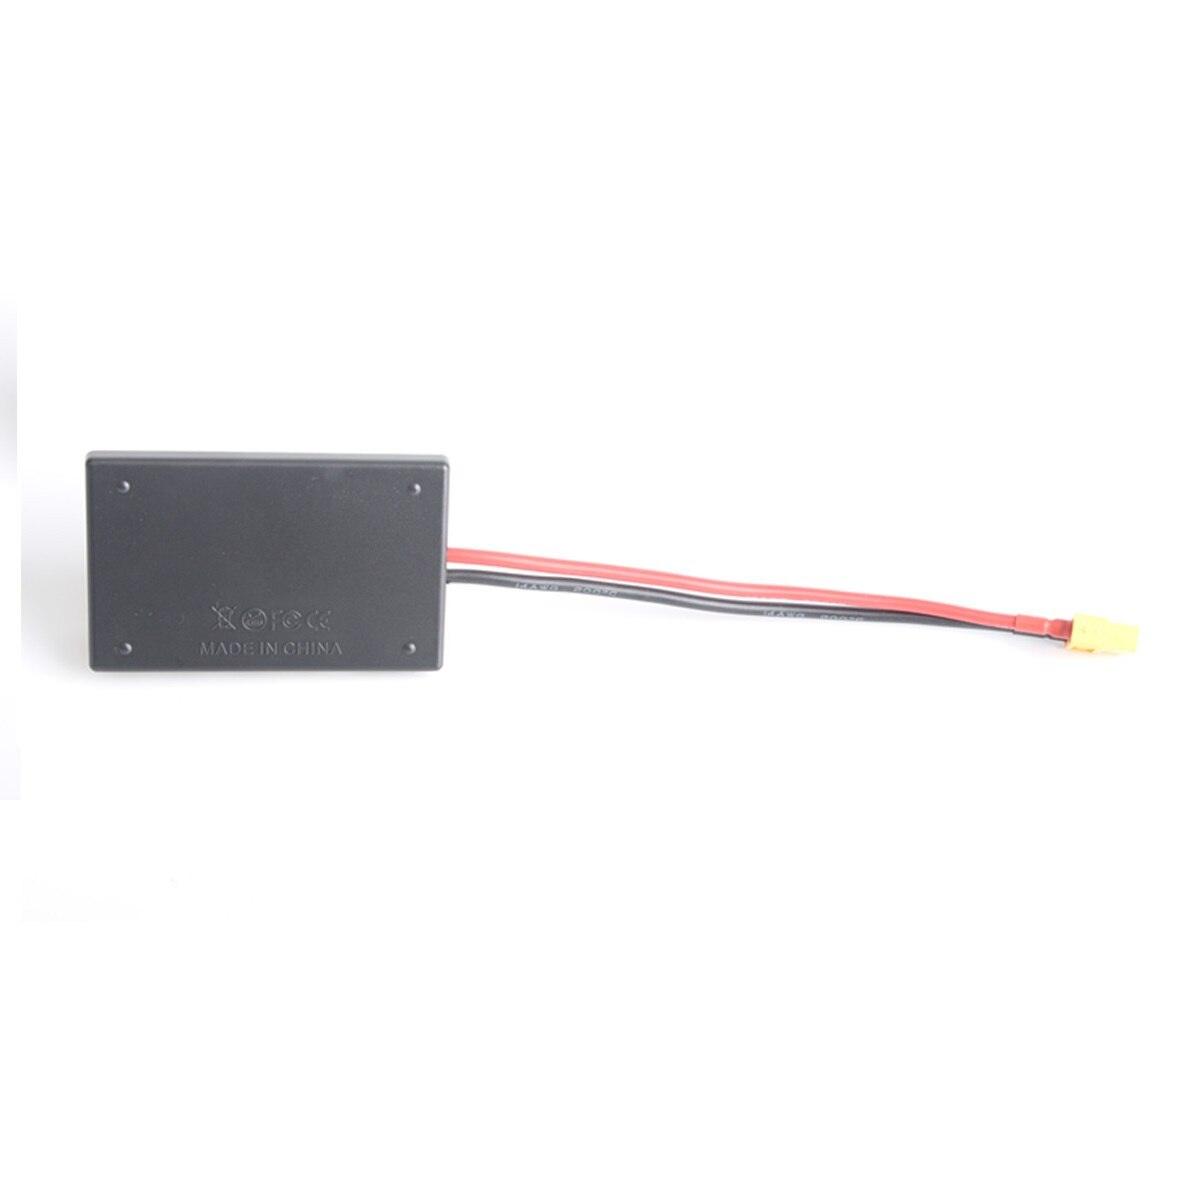 NEW 4CH 3s 4s Lipo Battery Parallel Charging Board - XT60 Banana Plug For ISDT D2 Q6 SC-608 SC-620 Imax B6 Charger RC Models Part - RCDrone